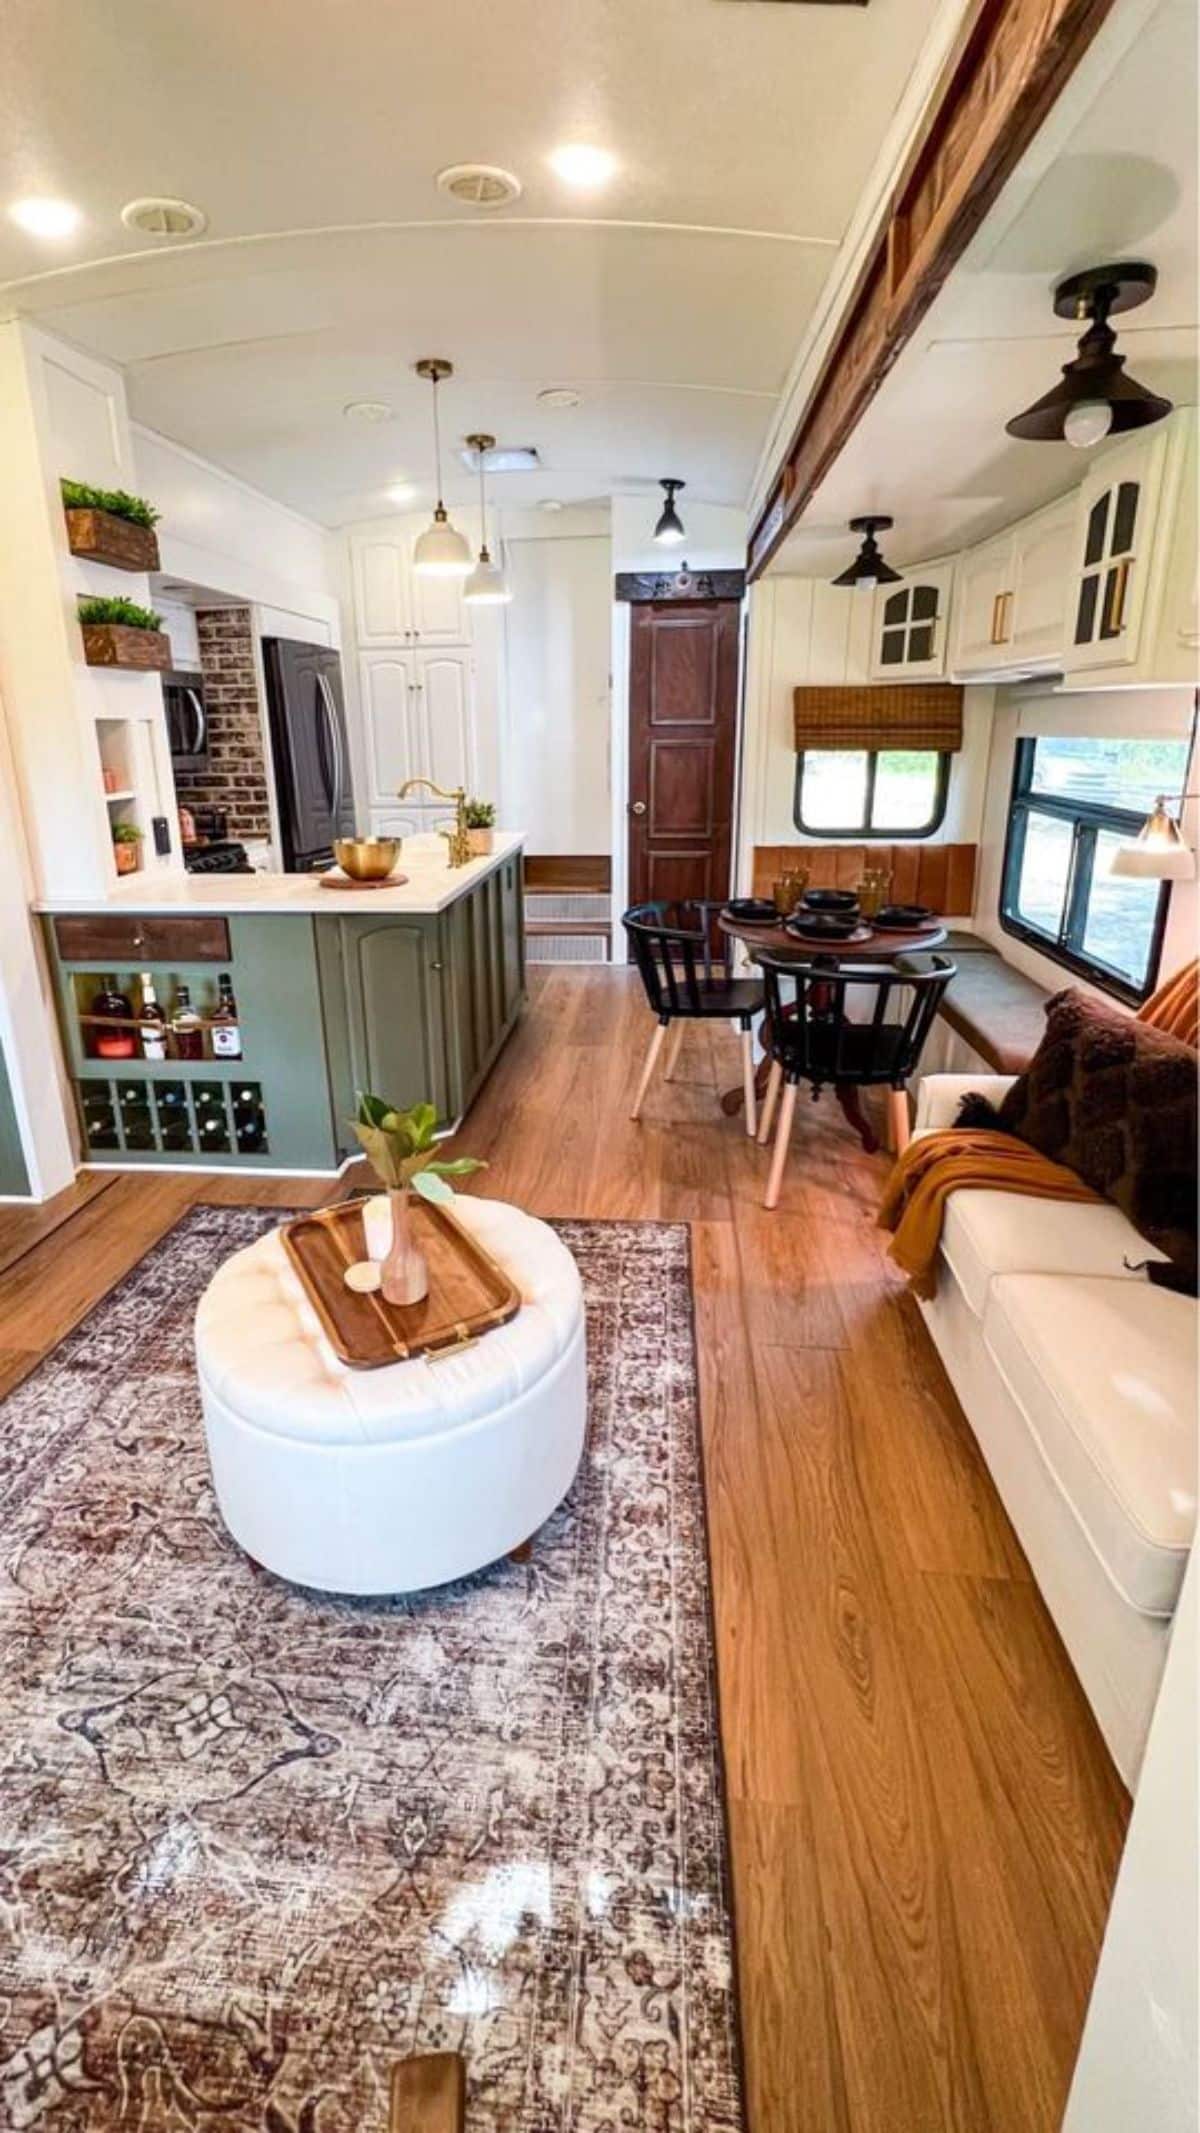 Stunning interiors of 40' Tiny House from living room view